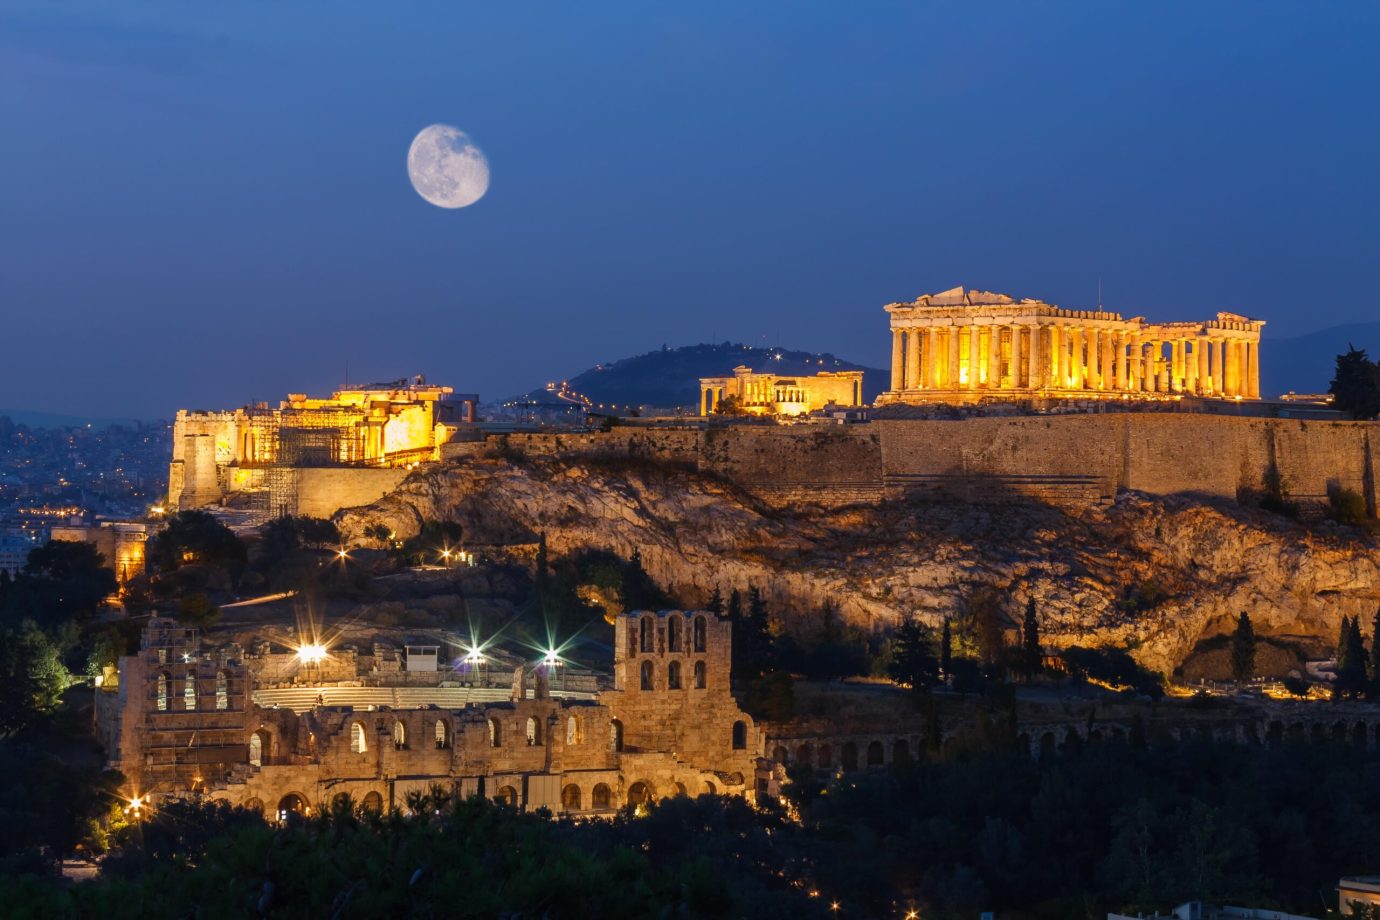 View of Acropolis in Athens, Greece at night